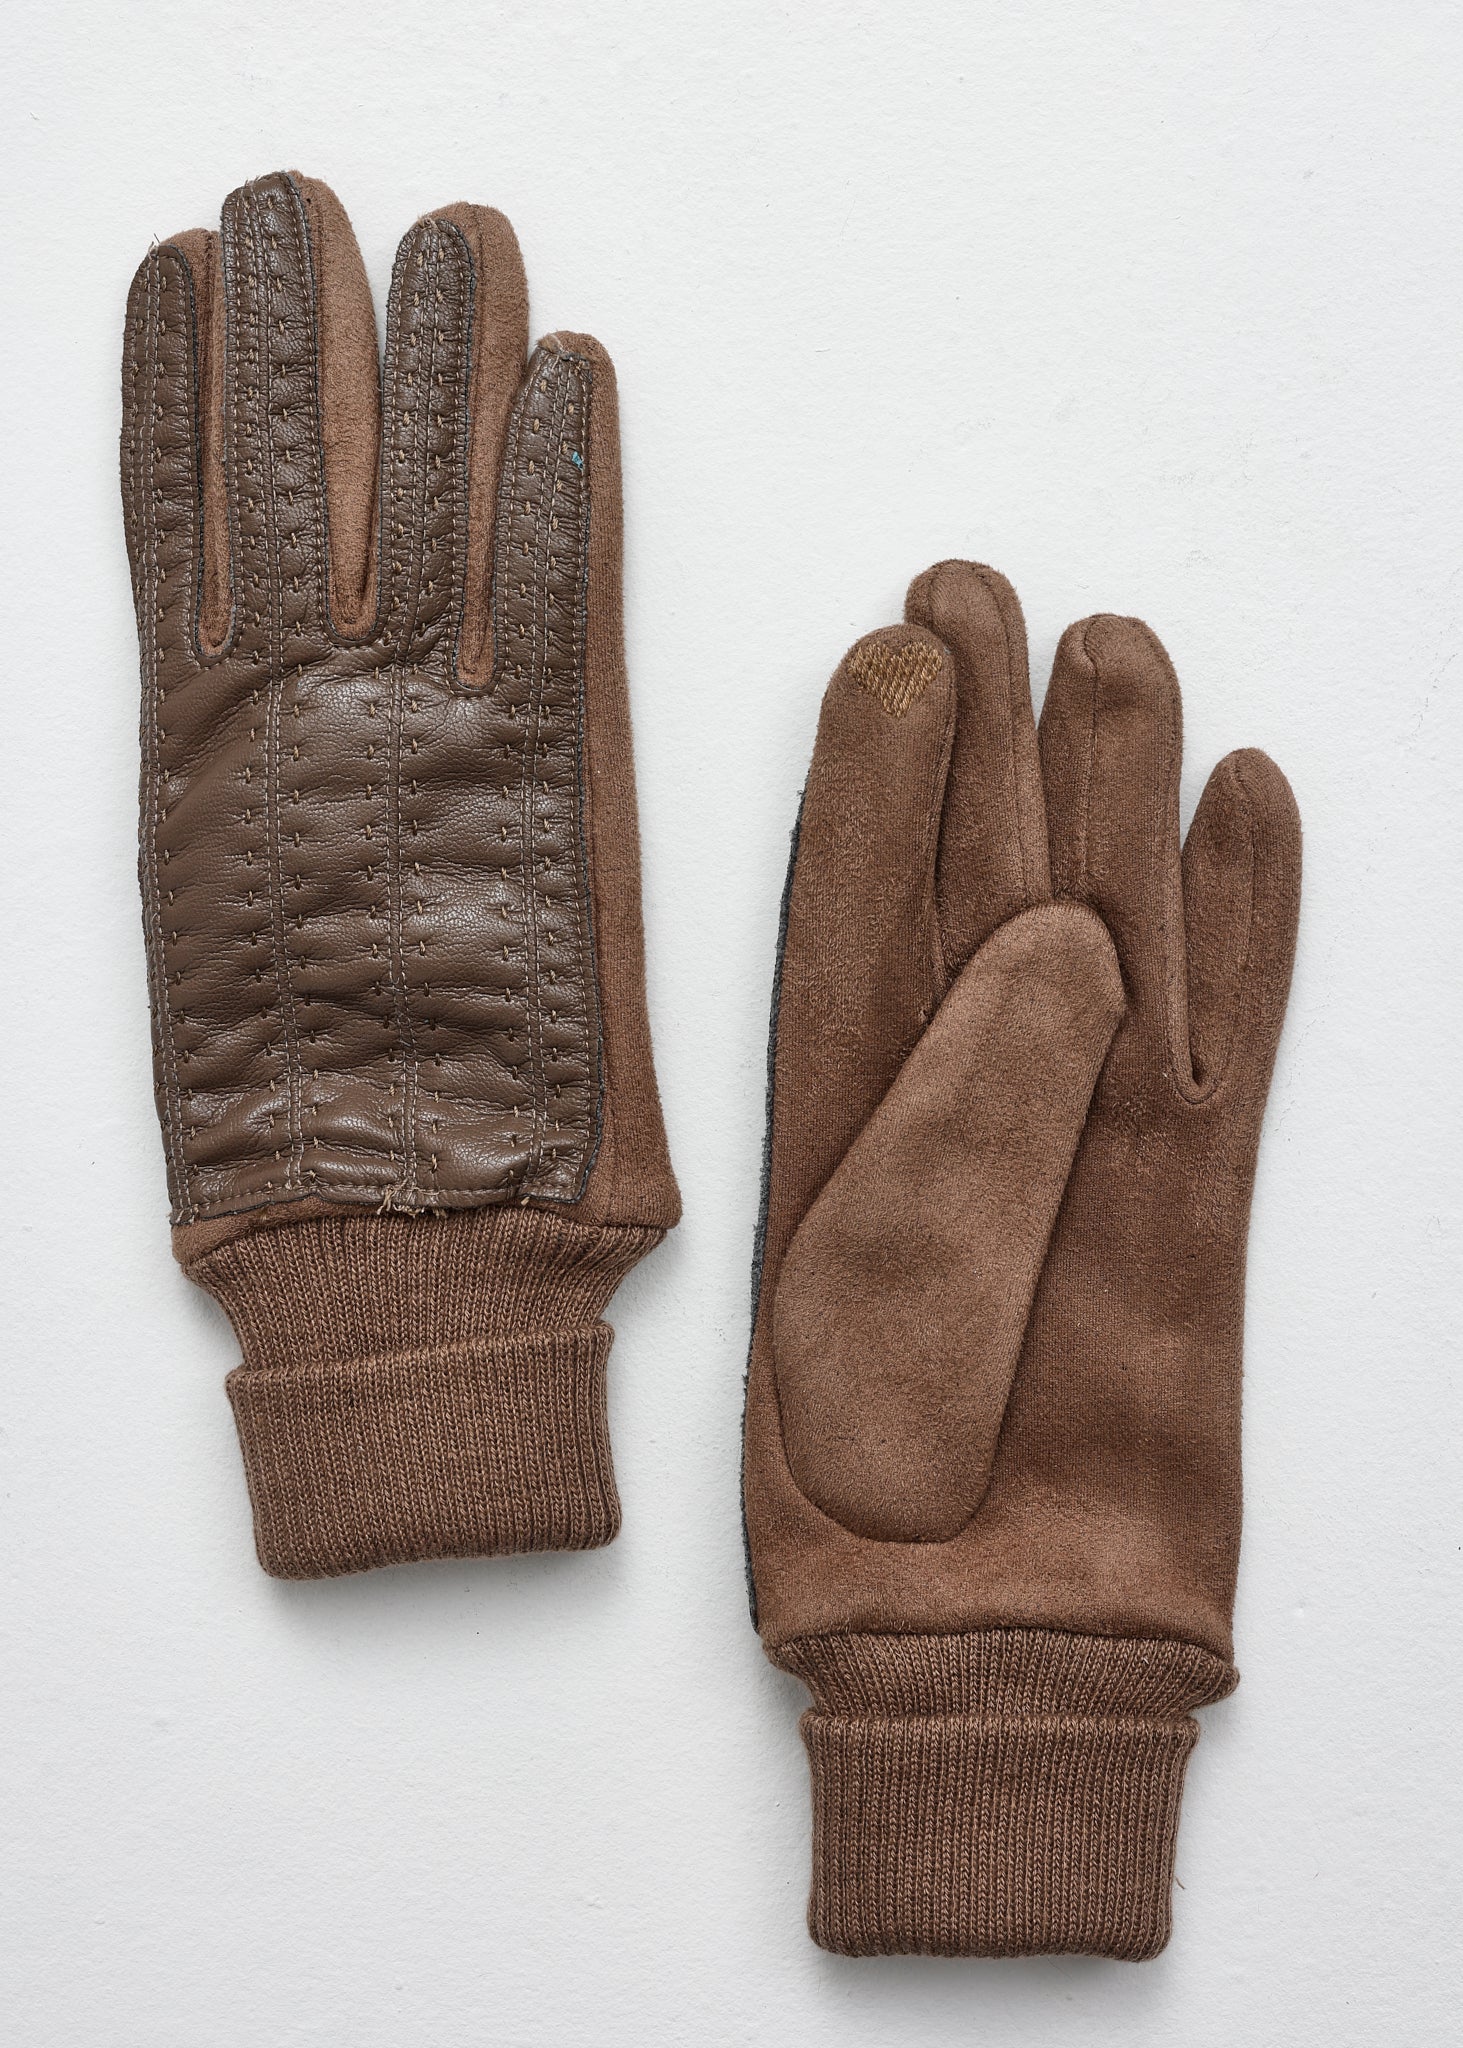 ECO leather gloves Cacao